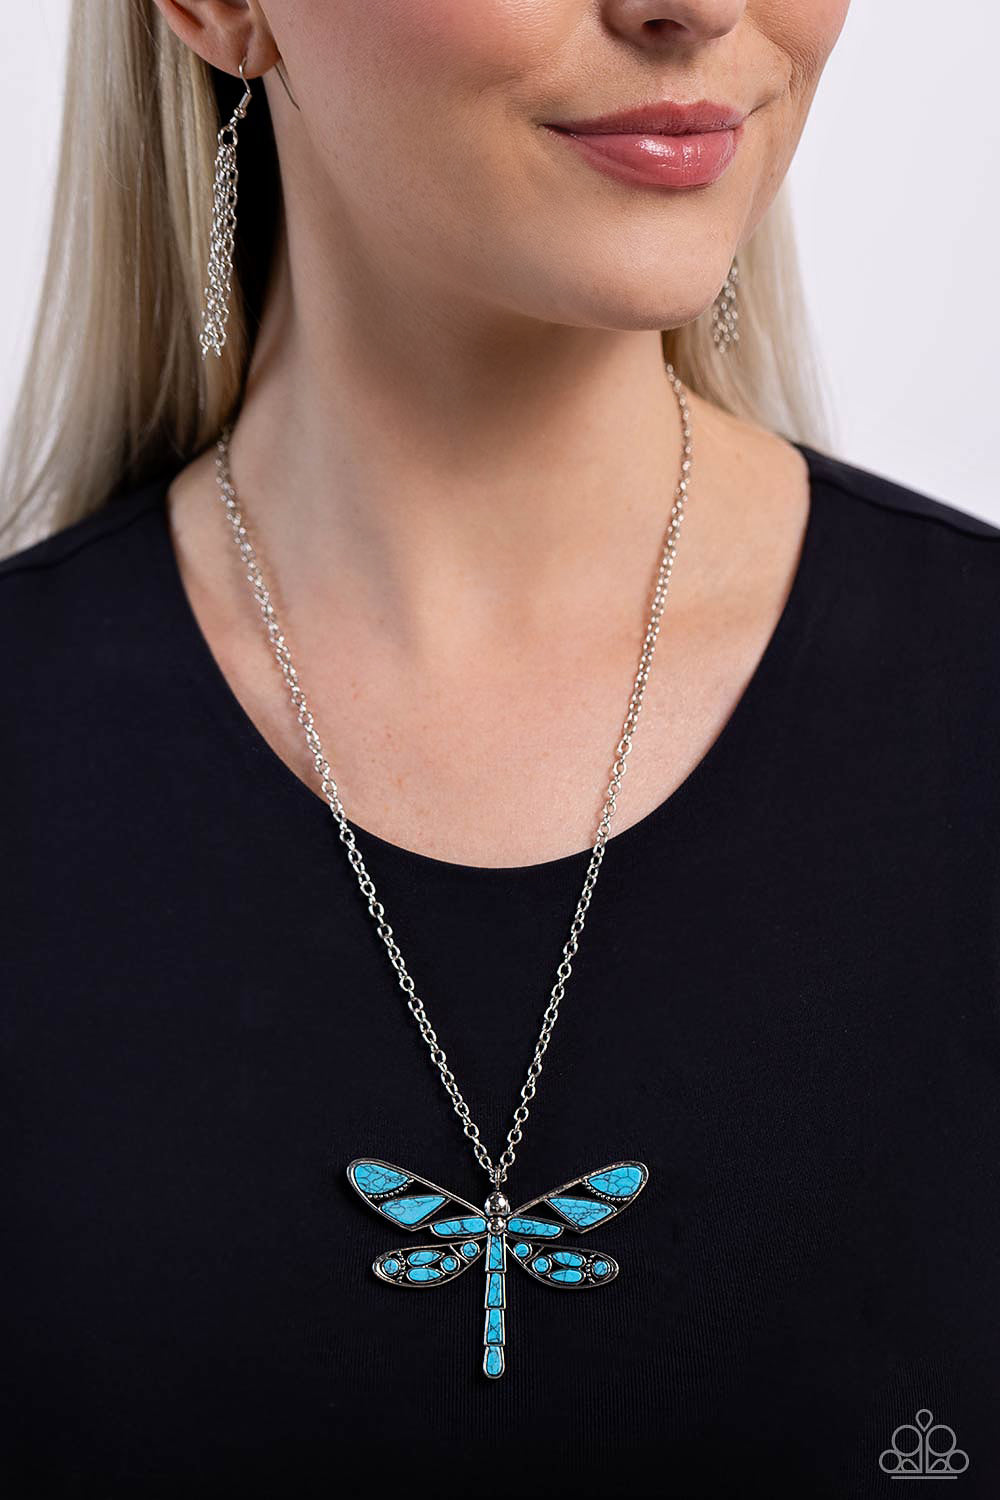 FLYING Low - Blue - Necklace